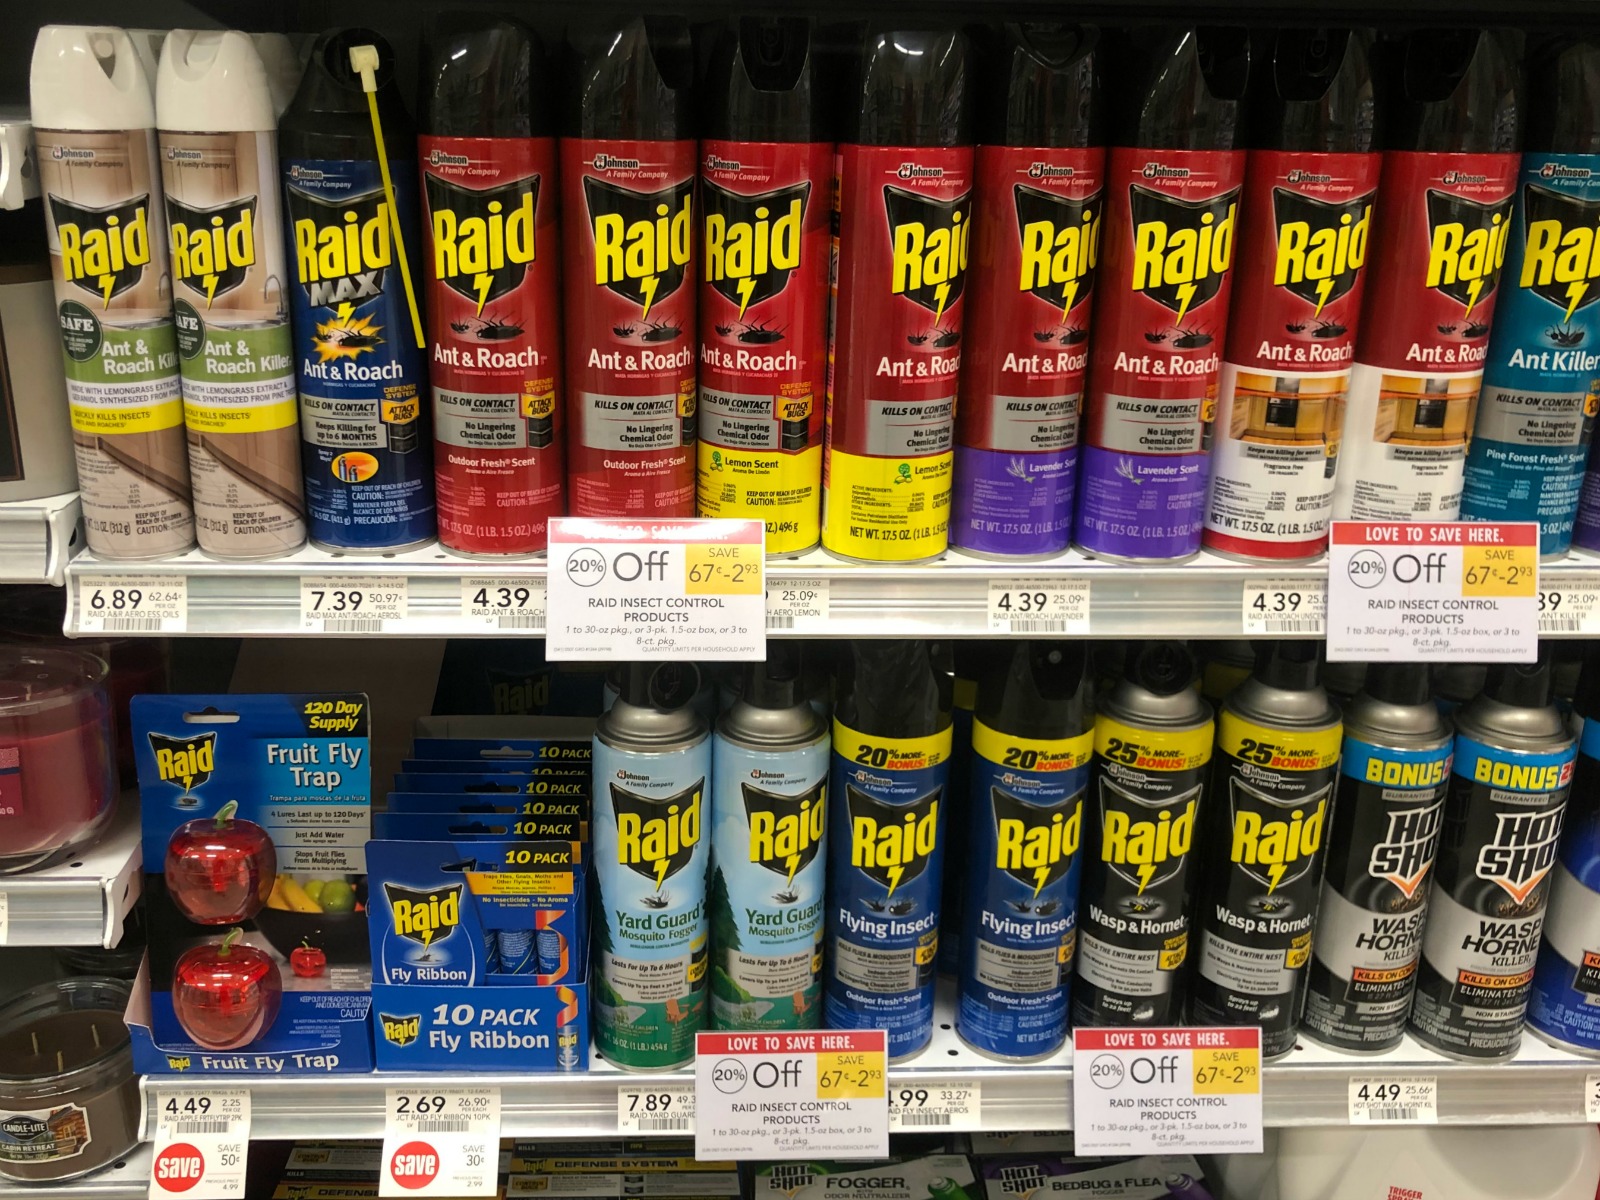 Get Savings On Raid® Ant And Roach With Essential Oils At Your Local Publix on I Heart Publix